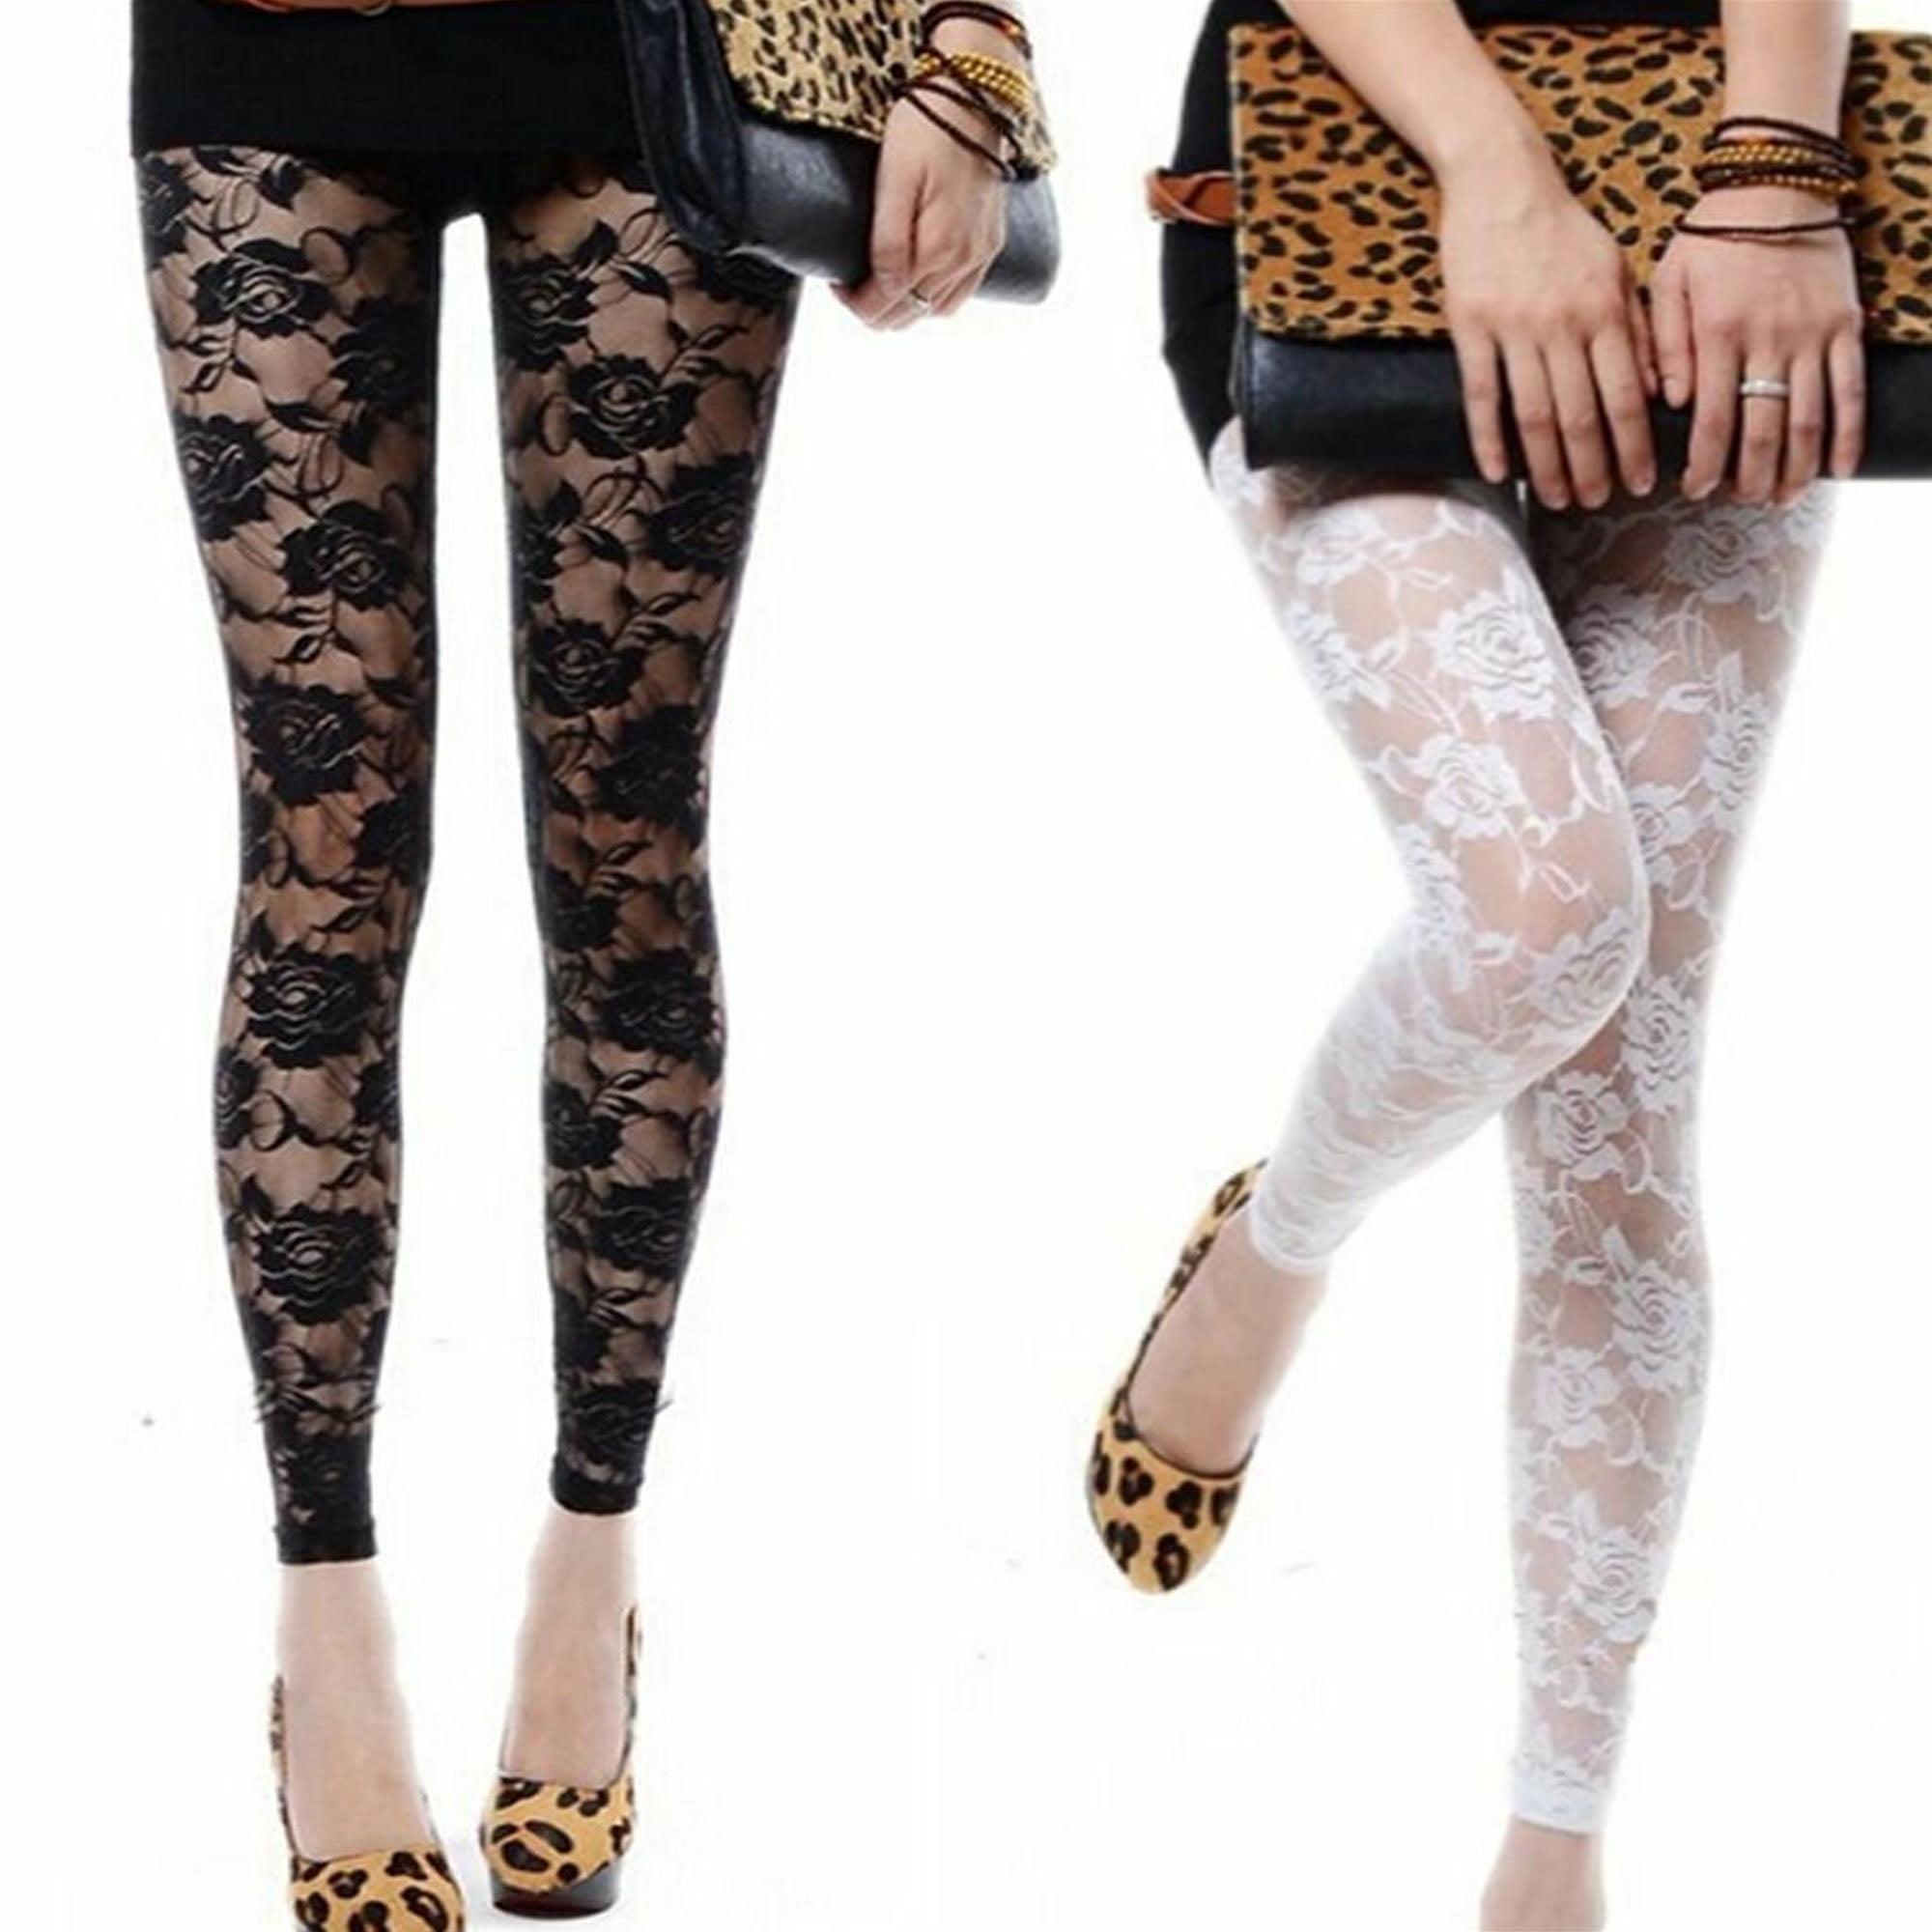 Lace Embroidery Womens Leggings Tights, Black Sexy Transparent